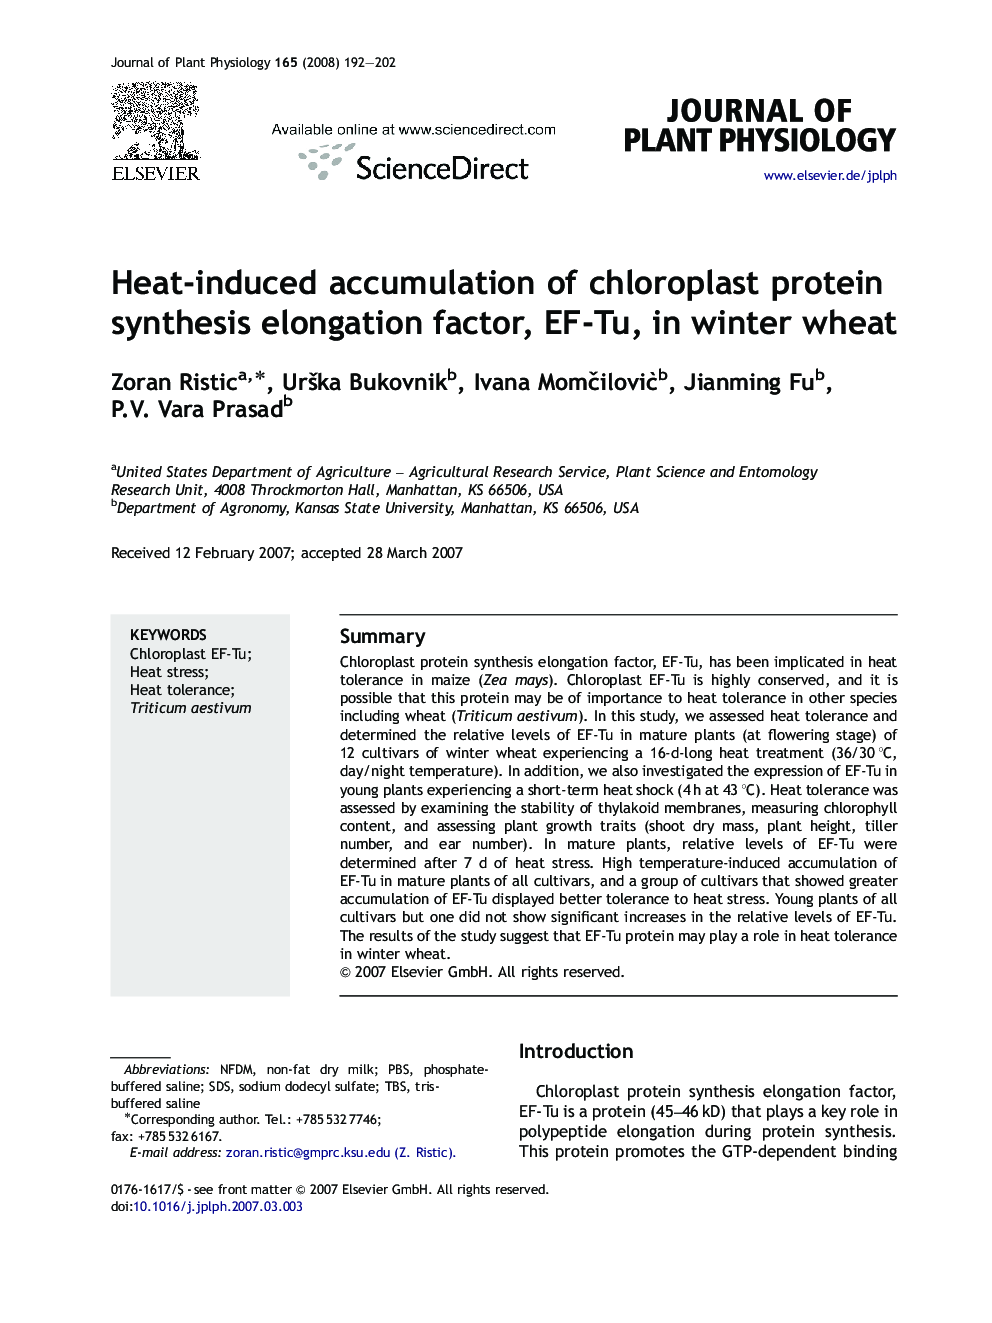 Heat-induced accumulation of chloroplast protein synthesis elongation factor, EF-Tu, in winter wheat